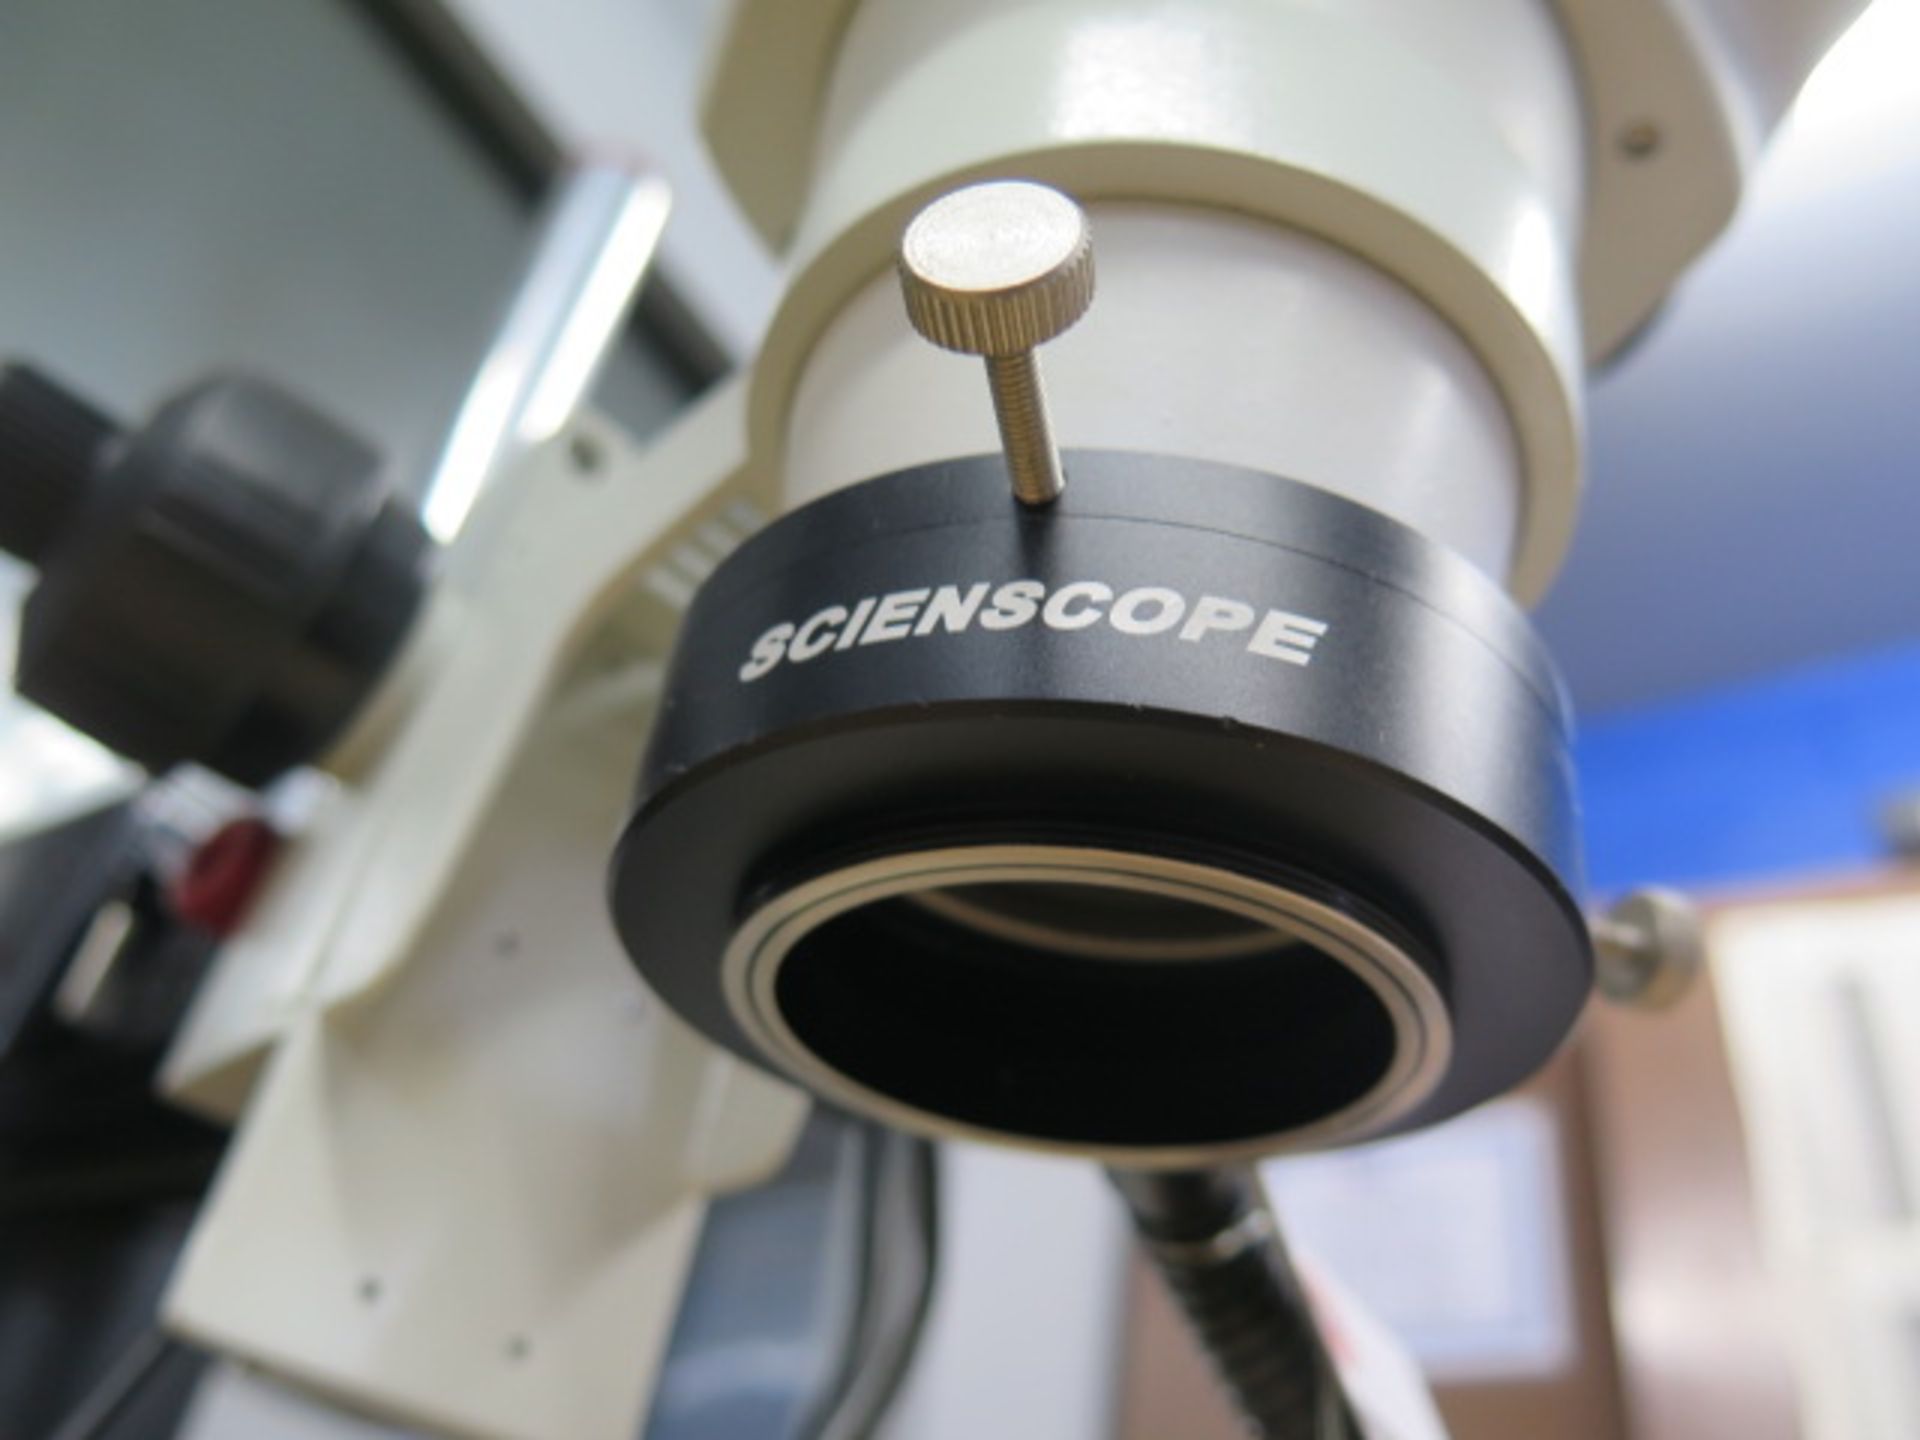 Scienscope Video Microscope w/ Light Source and Monitor (SOLD AS-IS - NO WARRANTY) - Image 5 of 8